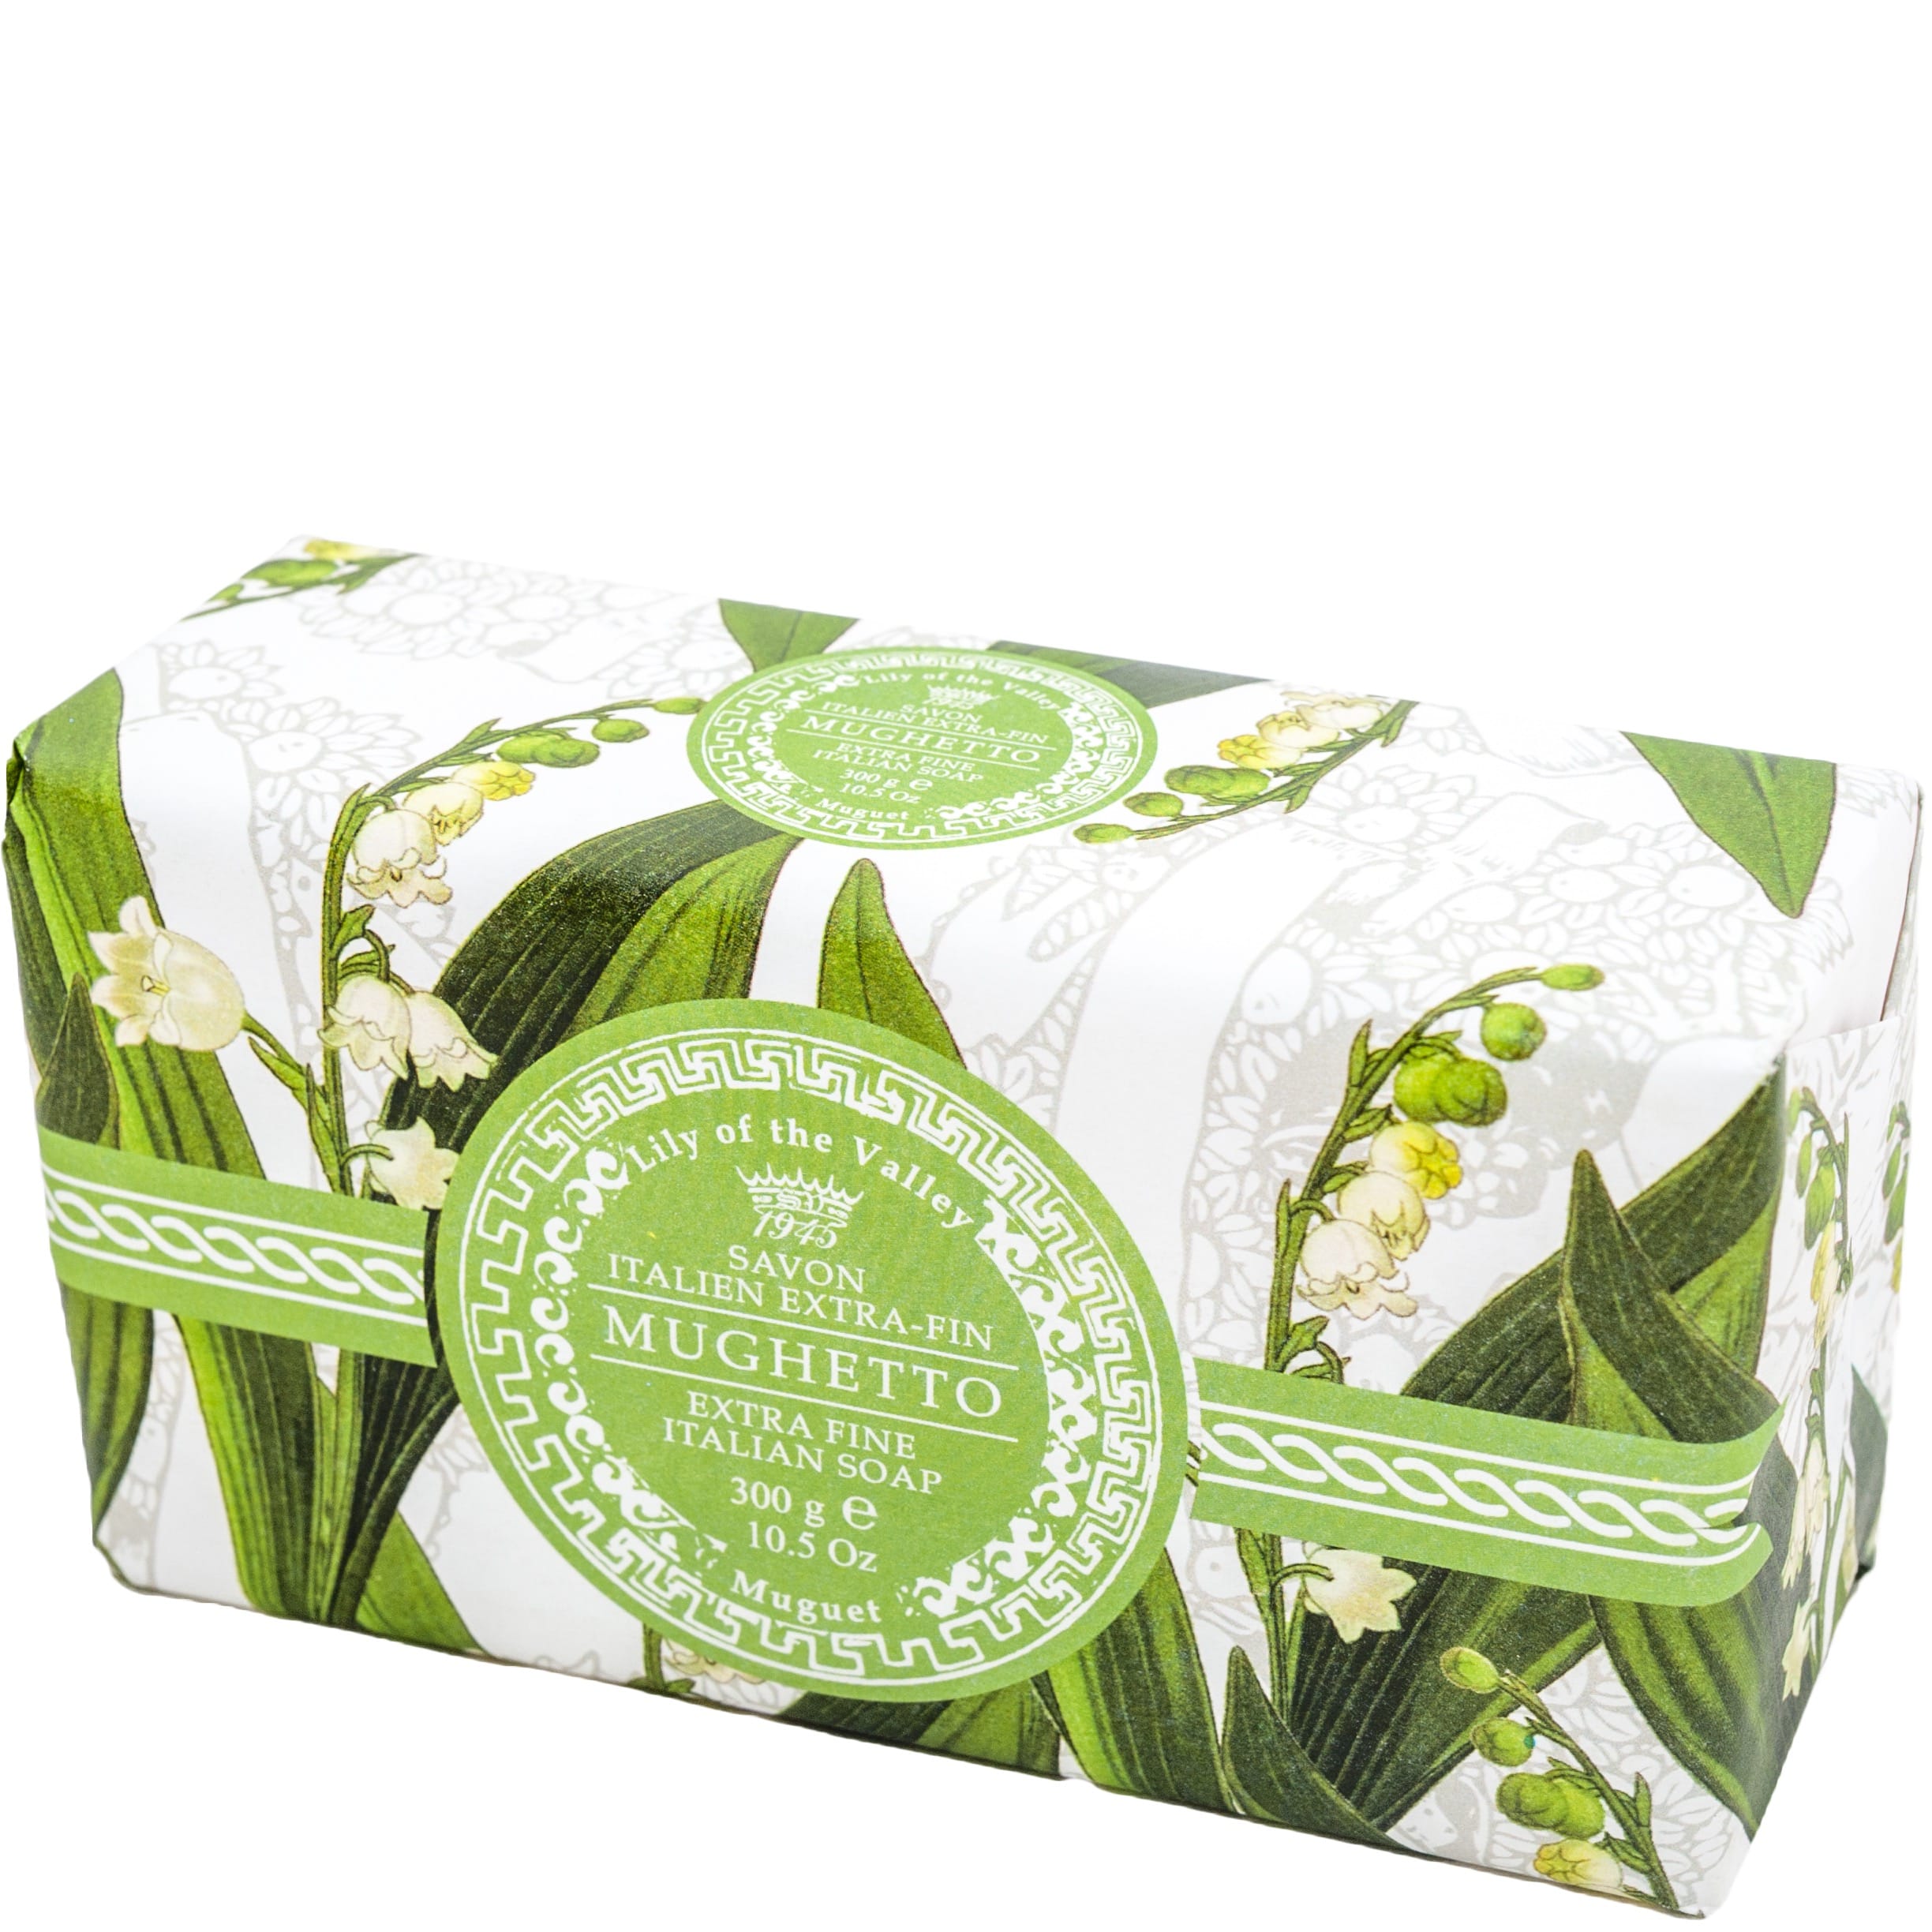 Saponificio Varesino Hand- en Body Soap Lily of the Valley 300g - 1.1 - SV-S1183